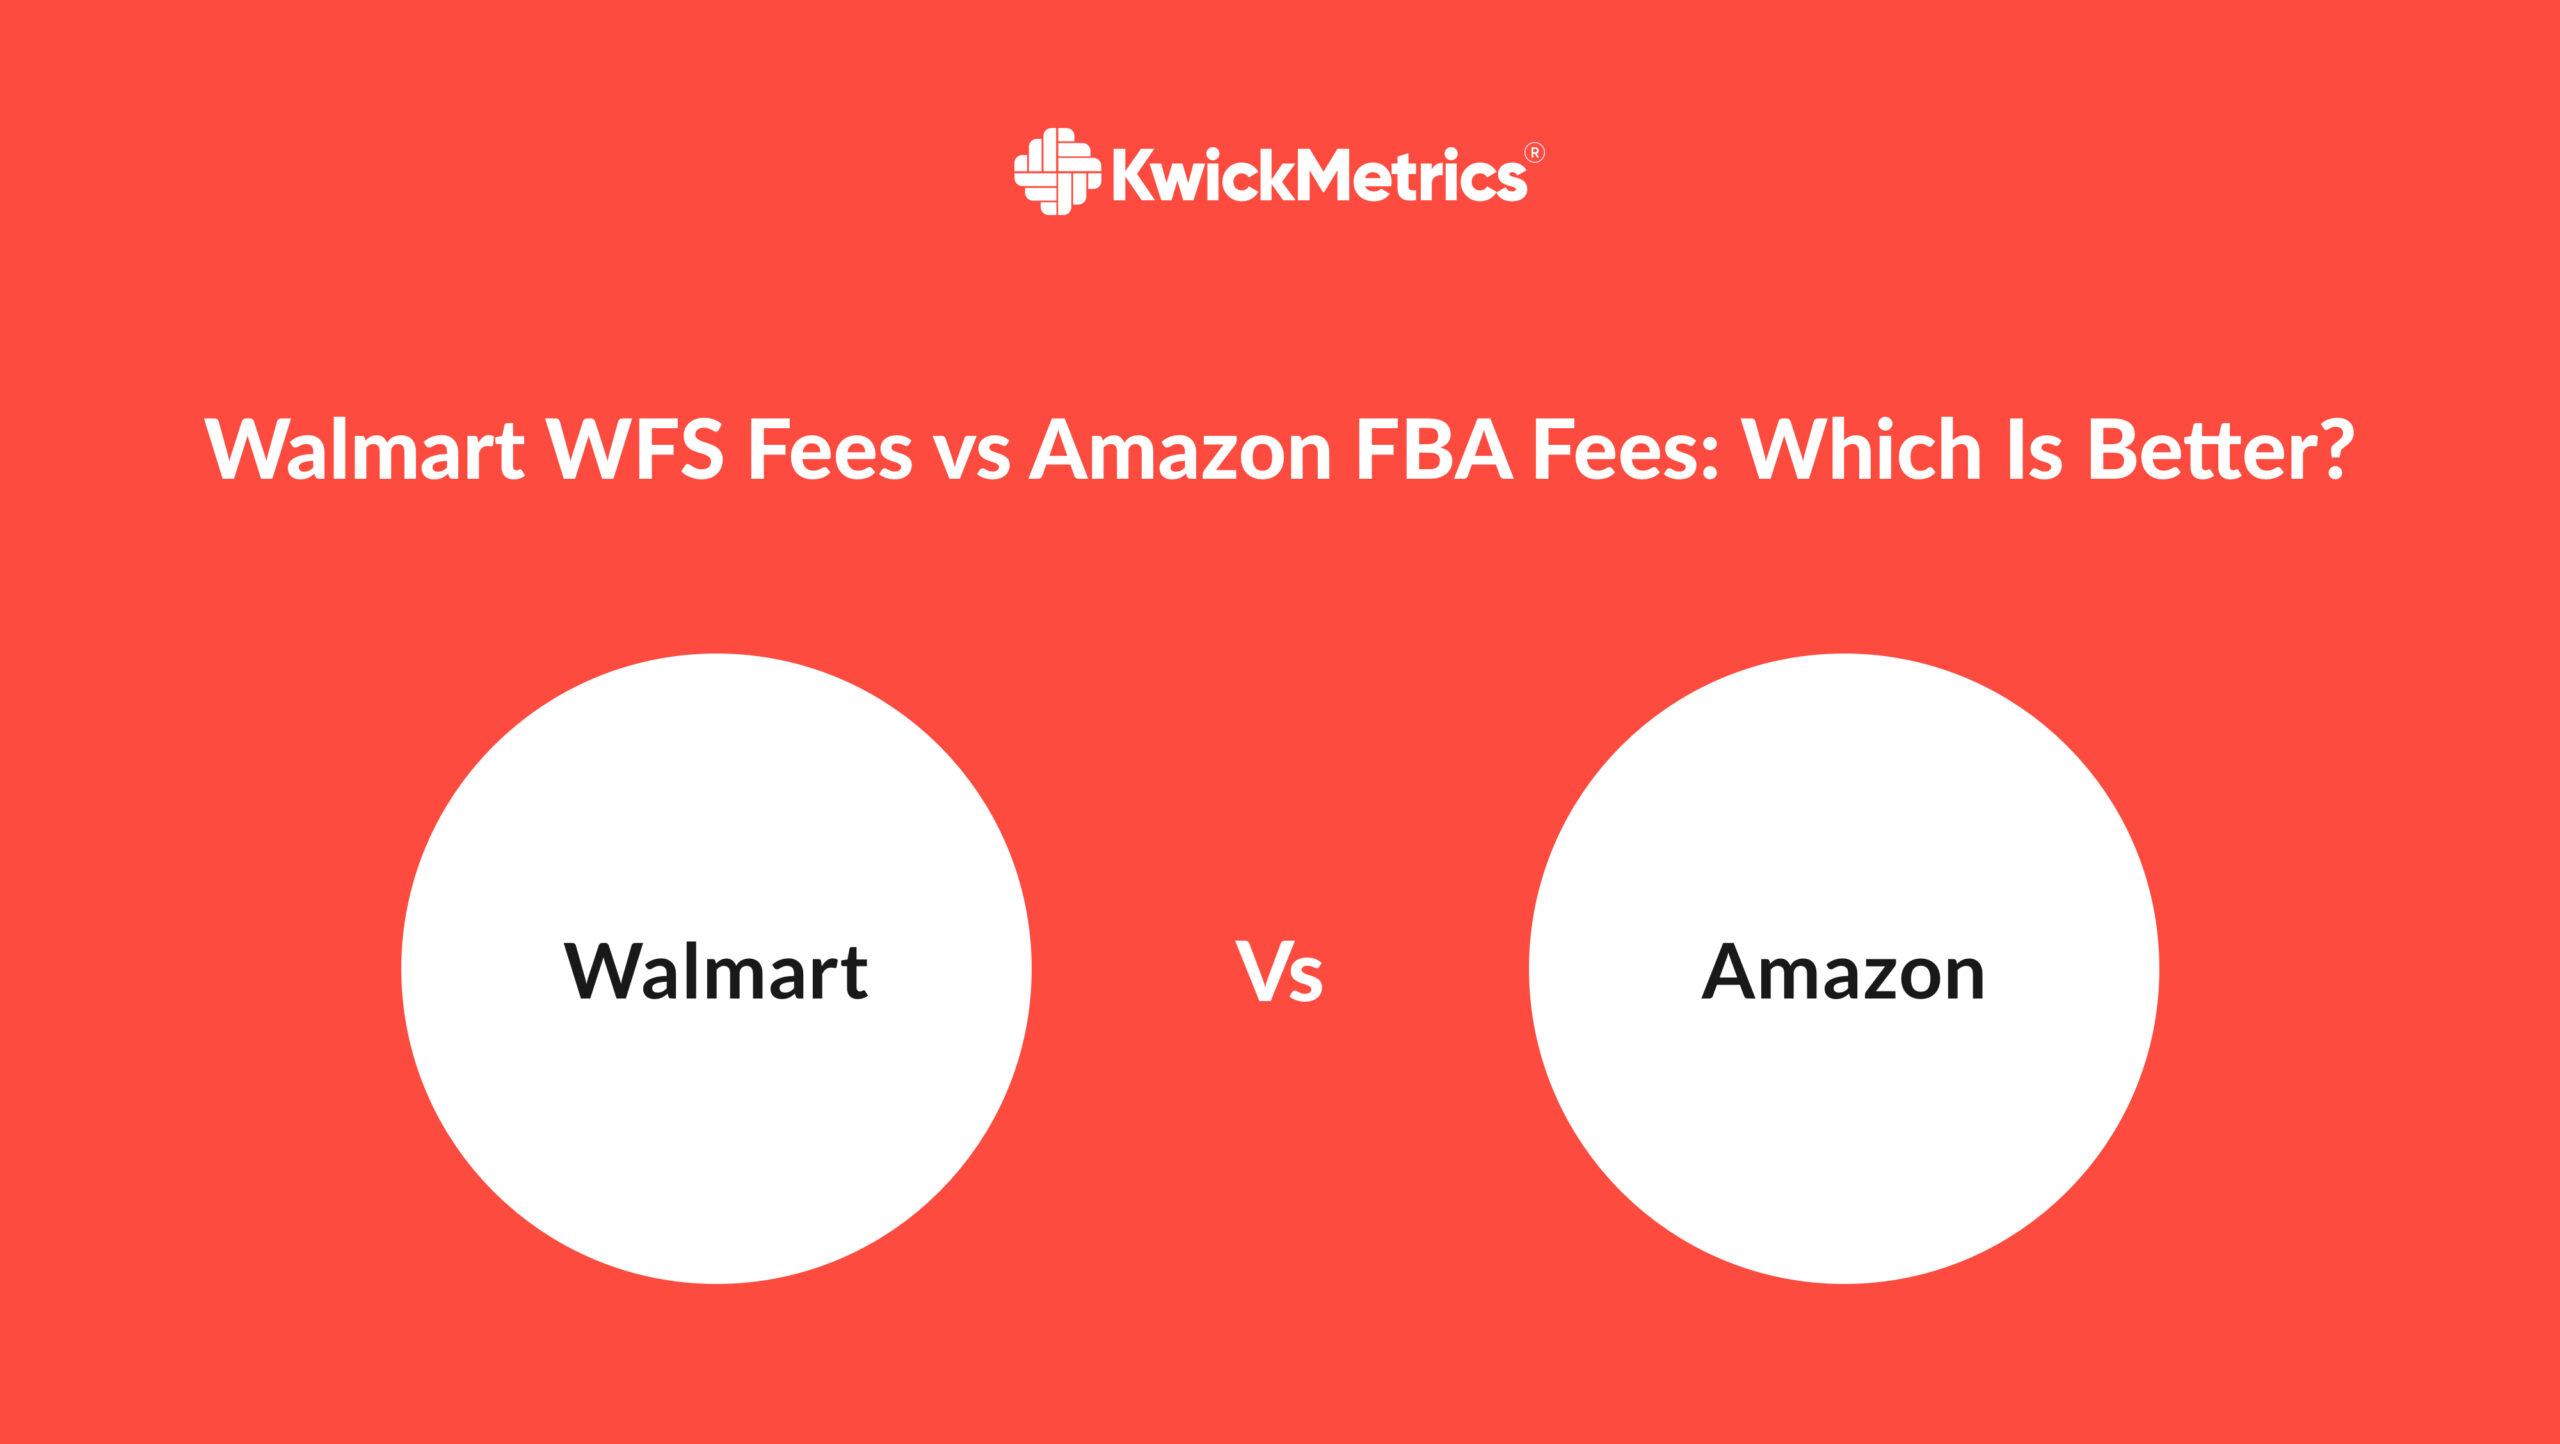 Walmart WFS Fees vs Amazon FBA Fees: Which Is Better? 